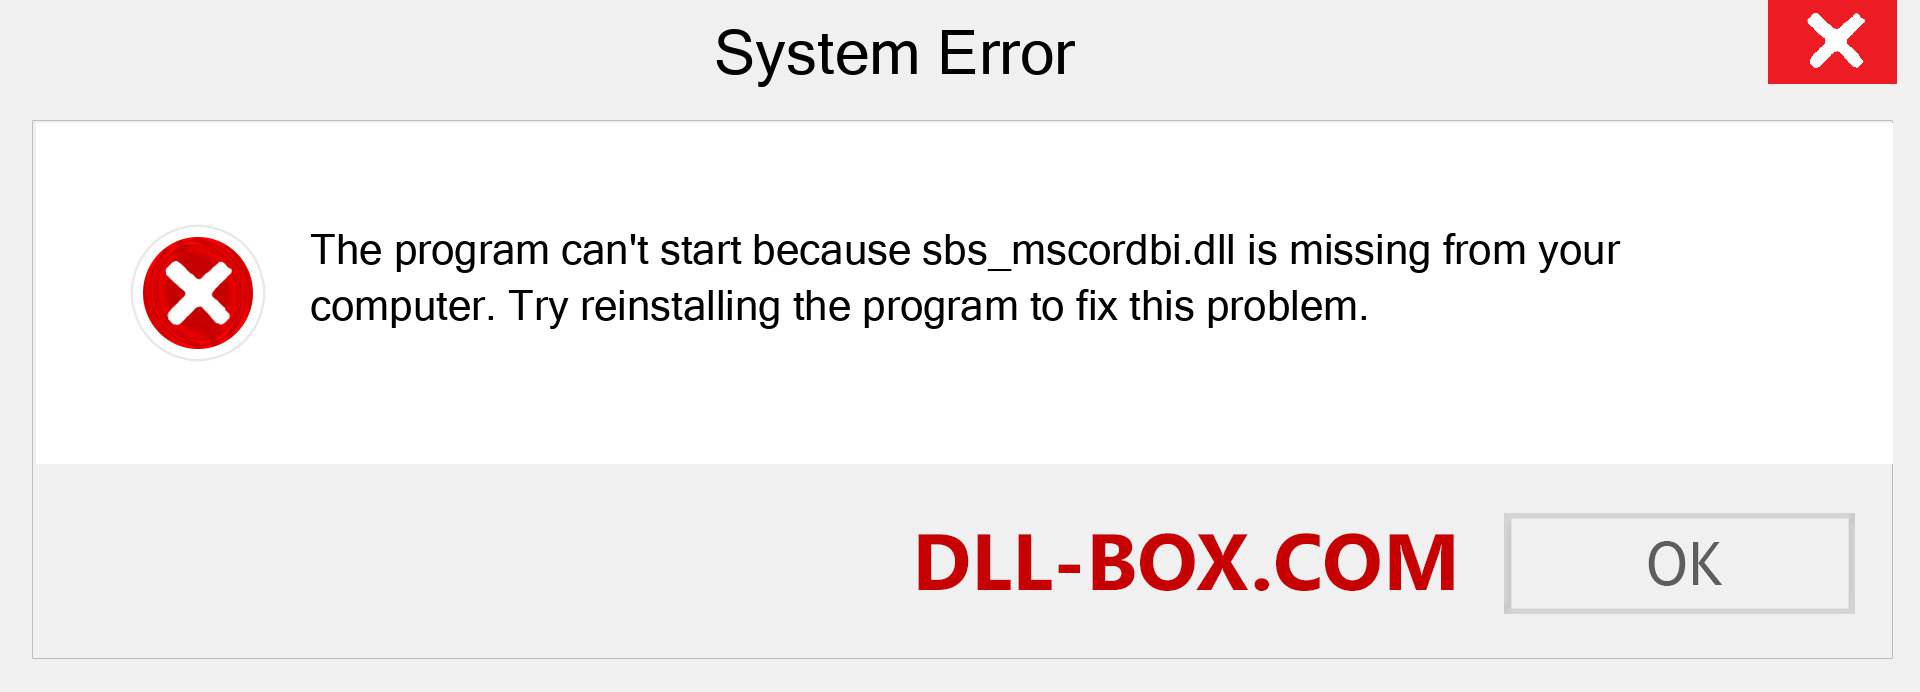  sbs_mscordbi.dll file is missing?. Download for Windows 7, 8, 10 - Fix  sbs_mscordbi dll Missing Error on Windows, photos, images